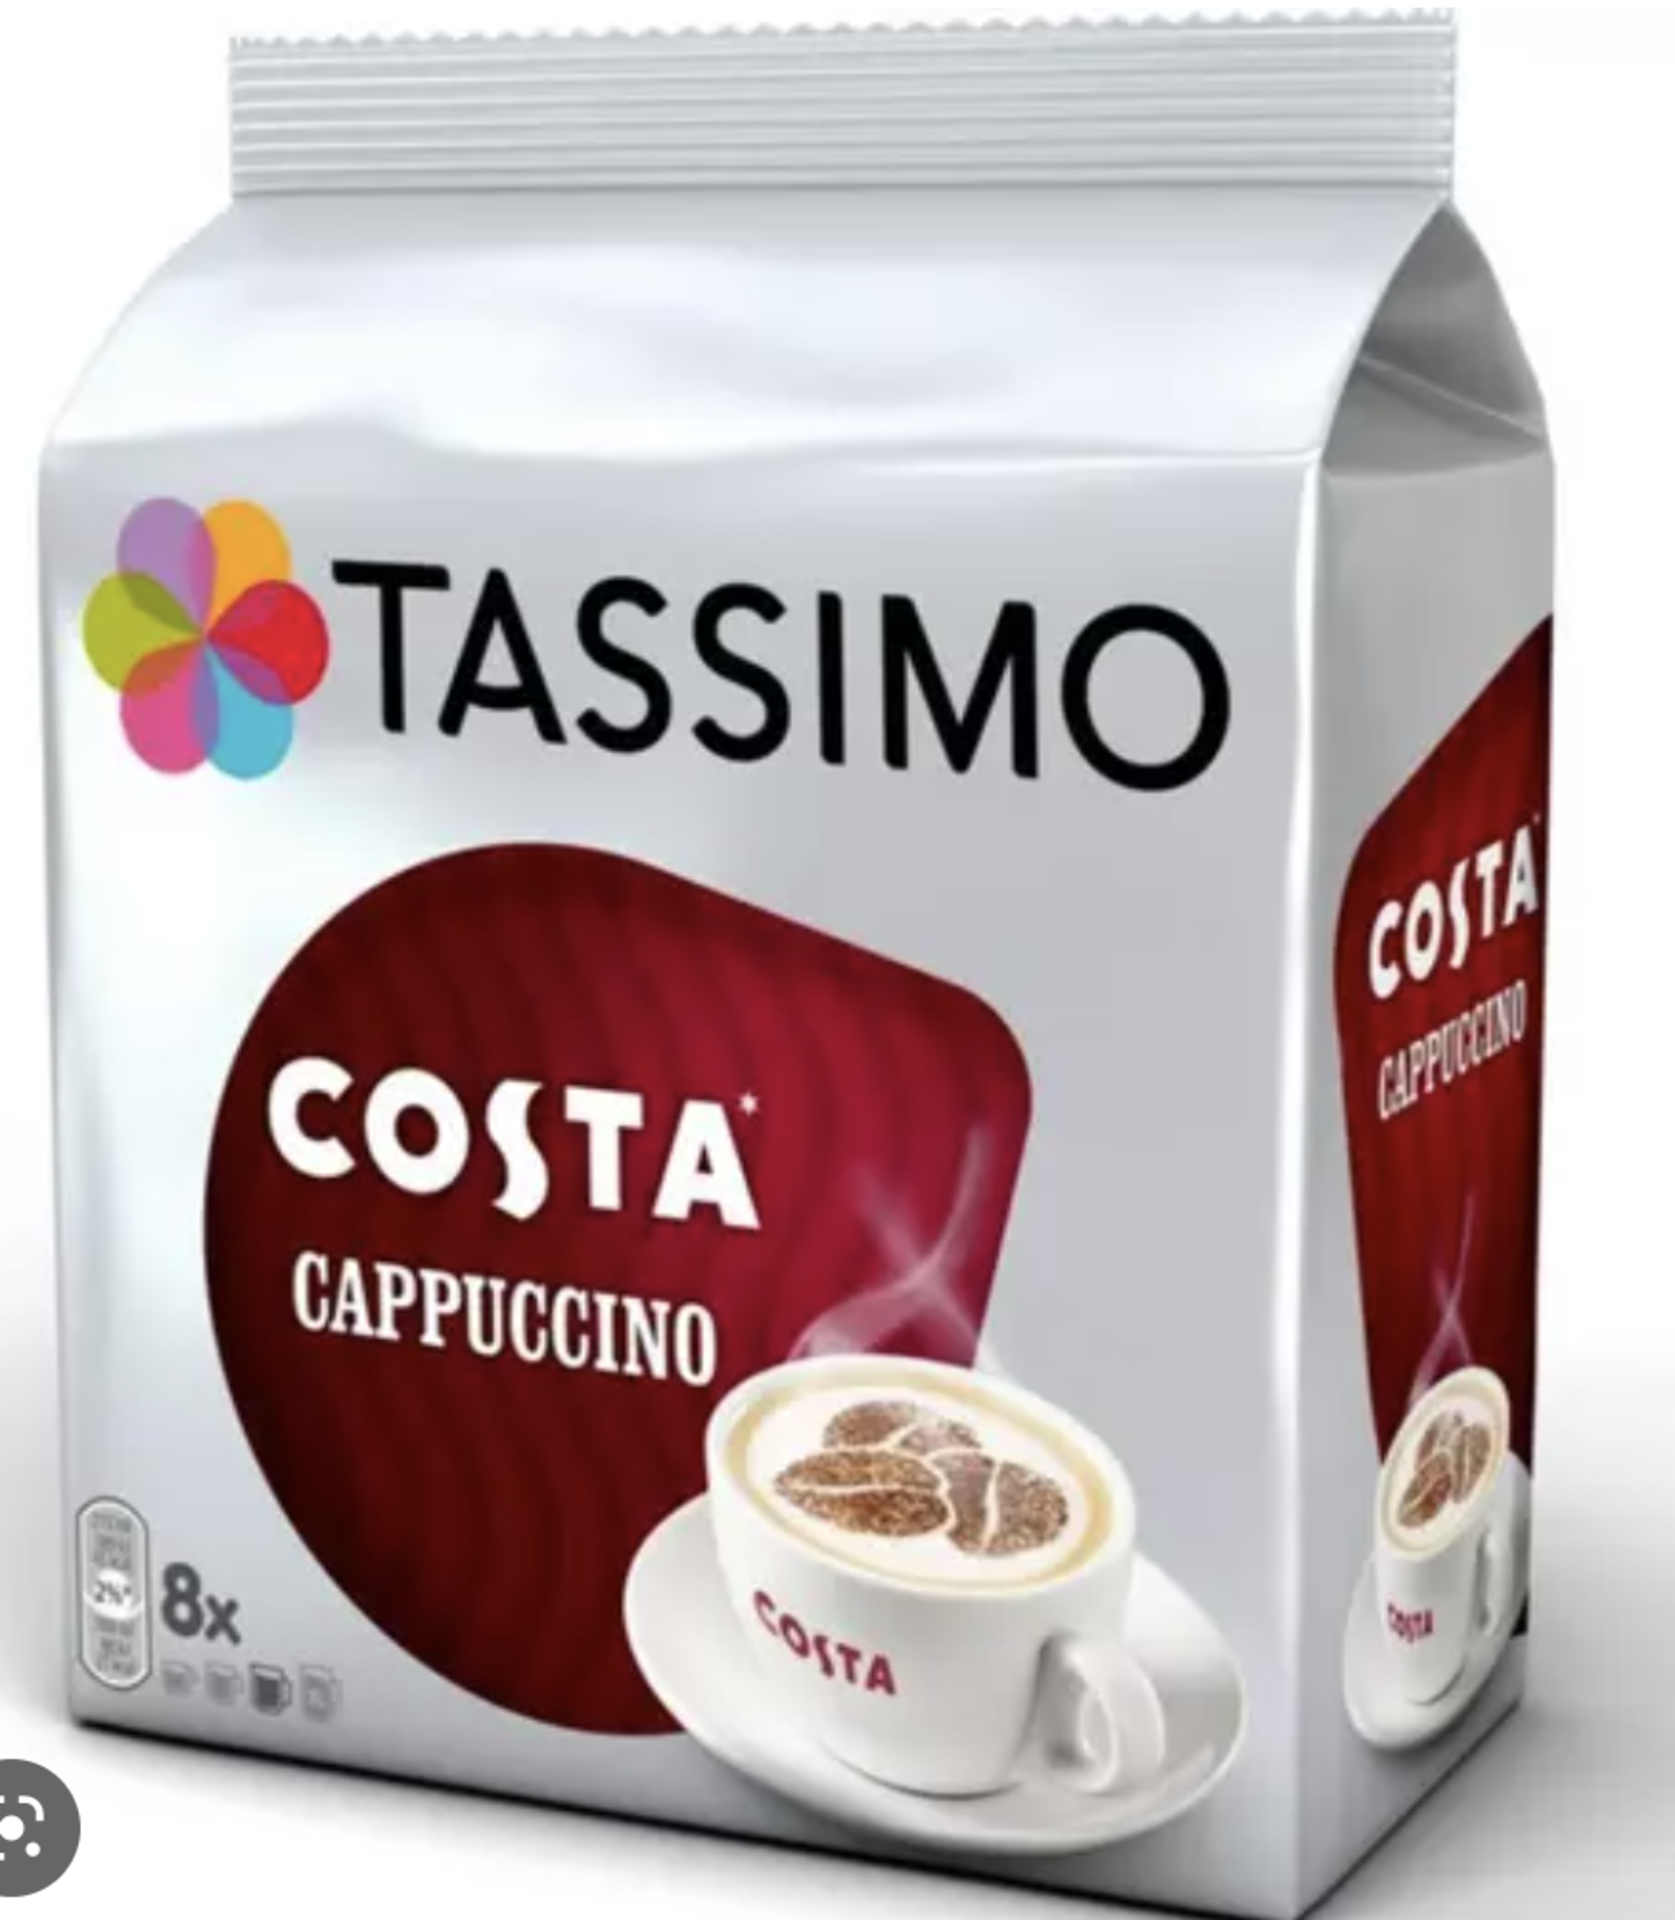 RRP £2681 (Approx. Count 166) spW29R4221Q 61 x Tassimo Costa Cappuccino Coffee Pods X8 (Pack of 5,